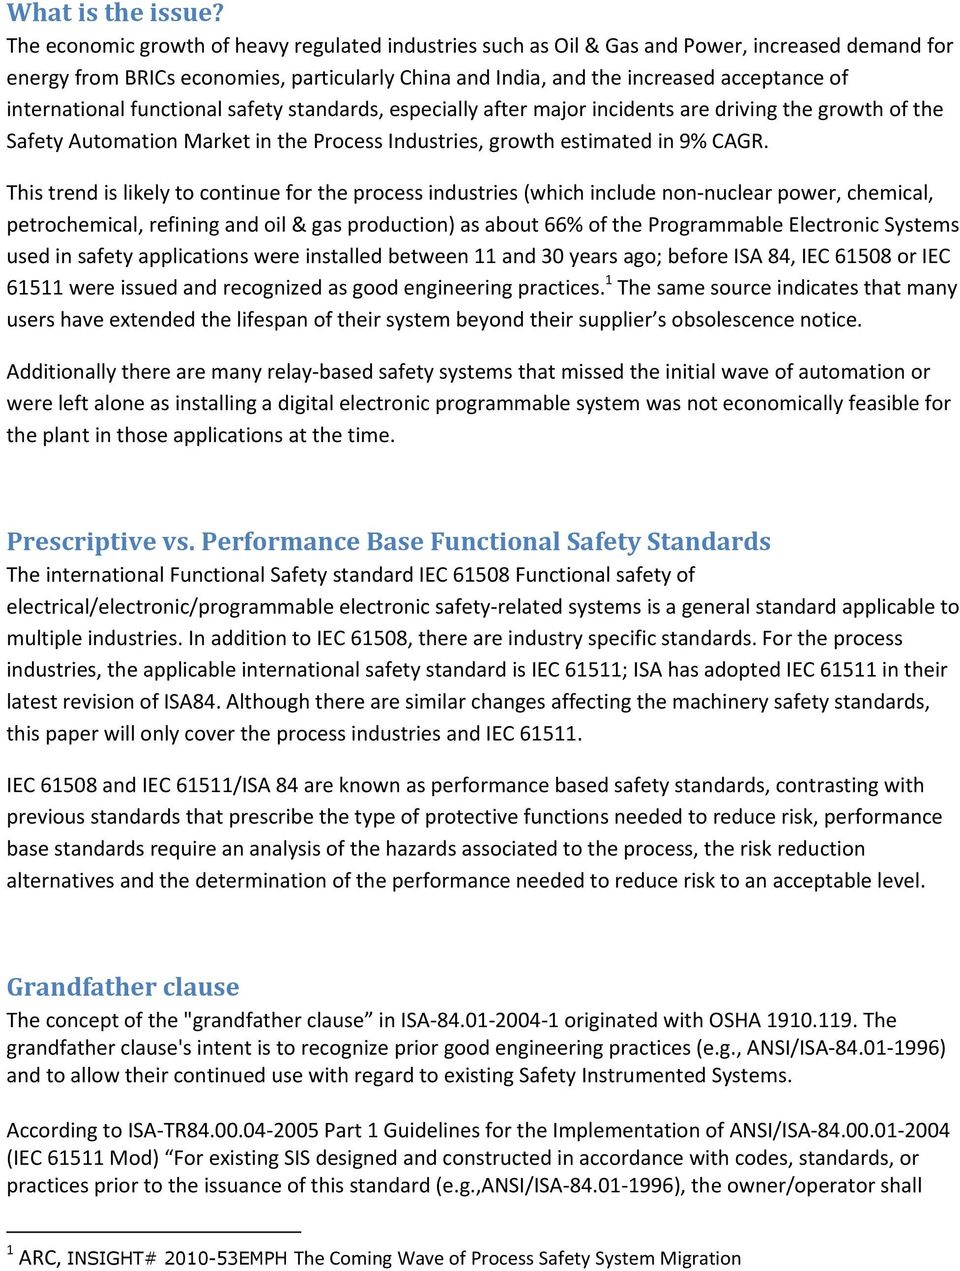 international functional safety standards, especially after major incidents are driving the growth of the Safety Automation Market in the Process Industries, growth estimated in 9% CAGR.